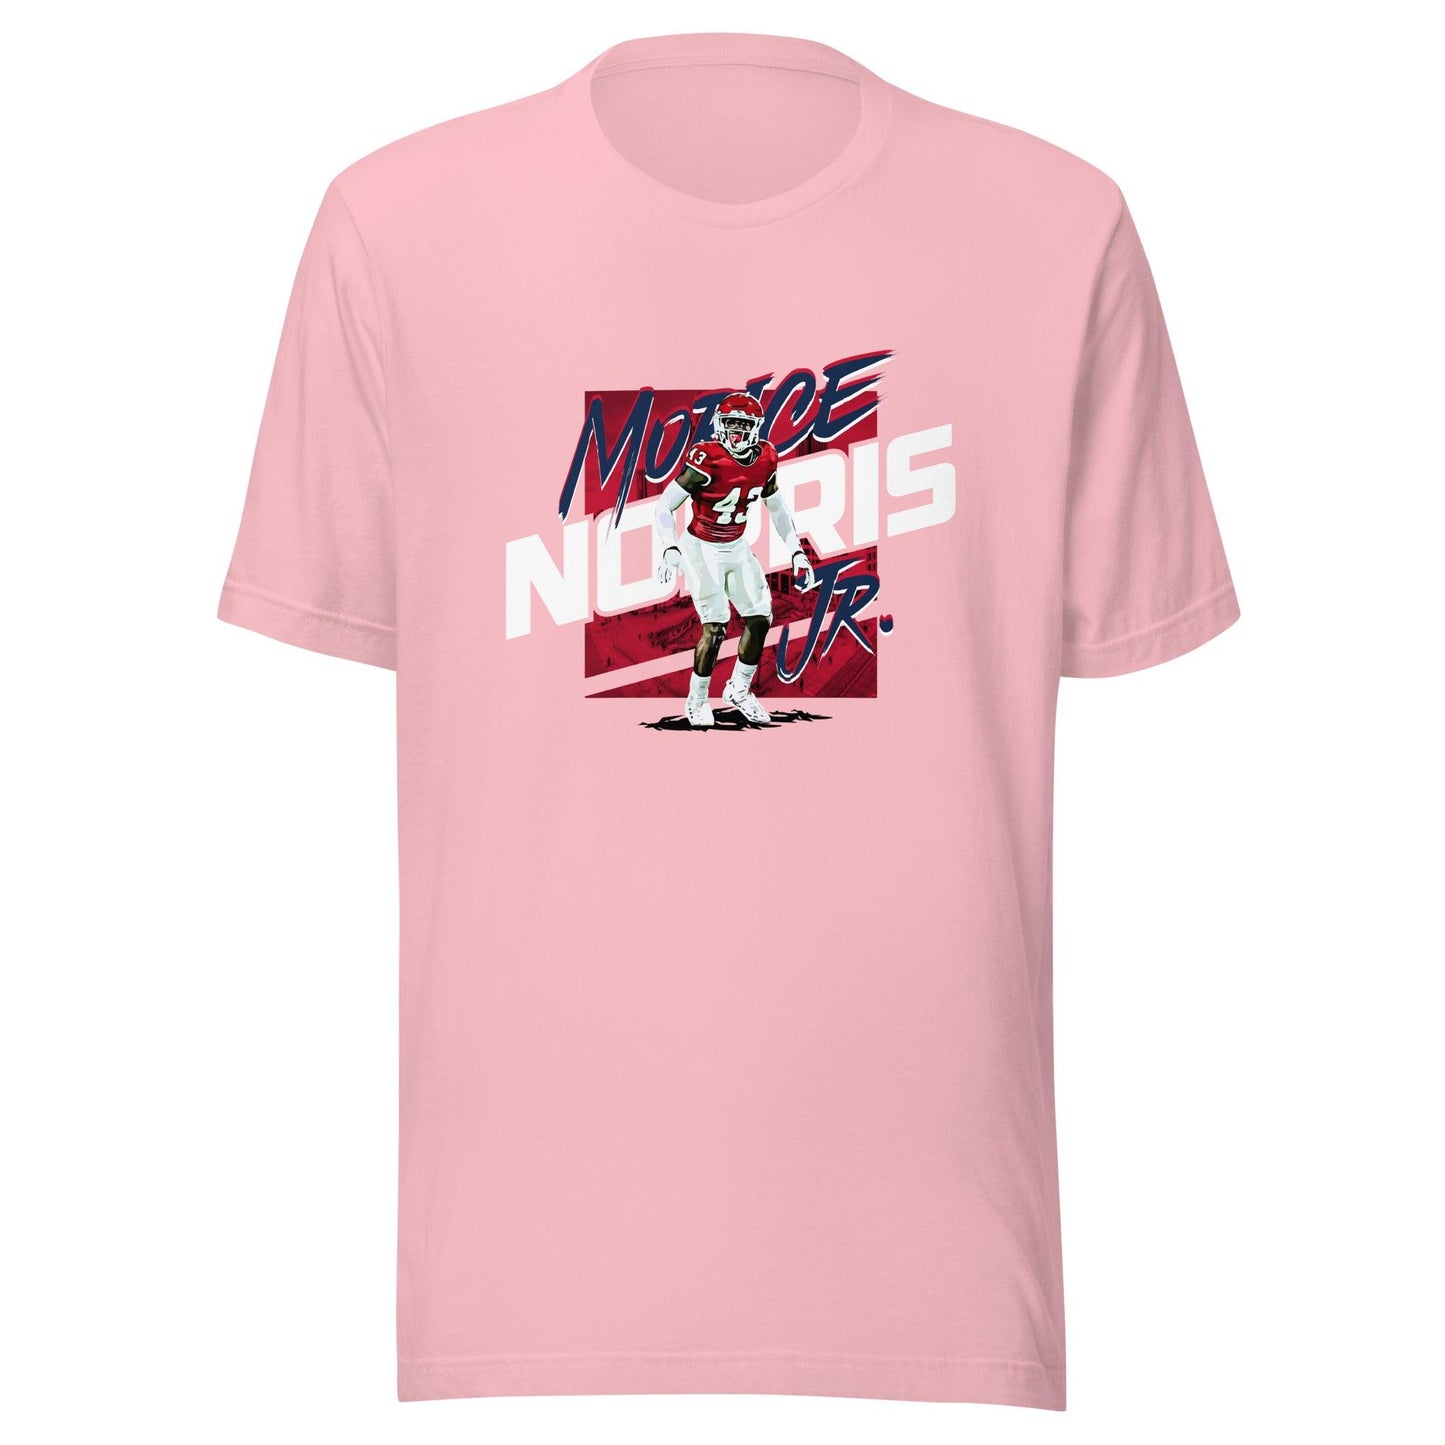 Morice Norris "Gameday" t-shirt - Fan Arch